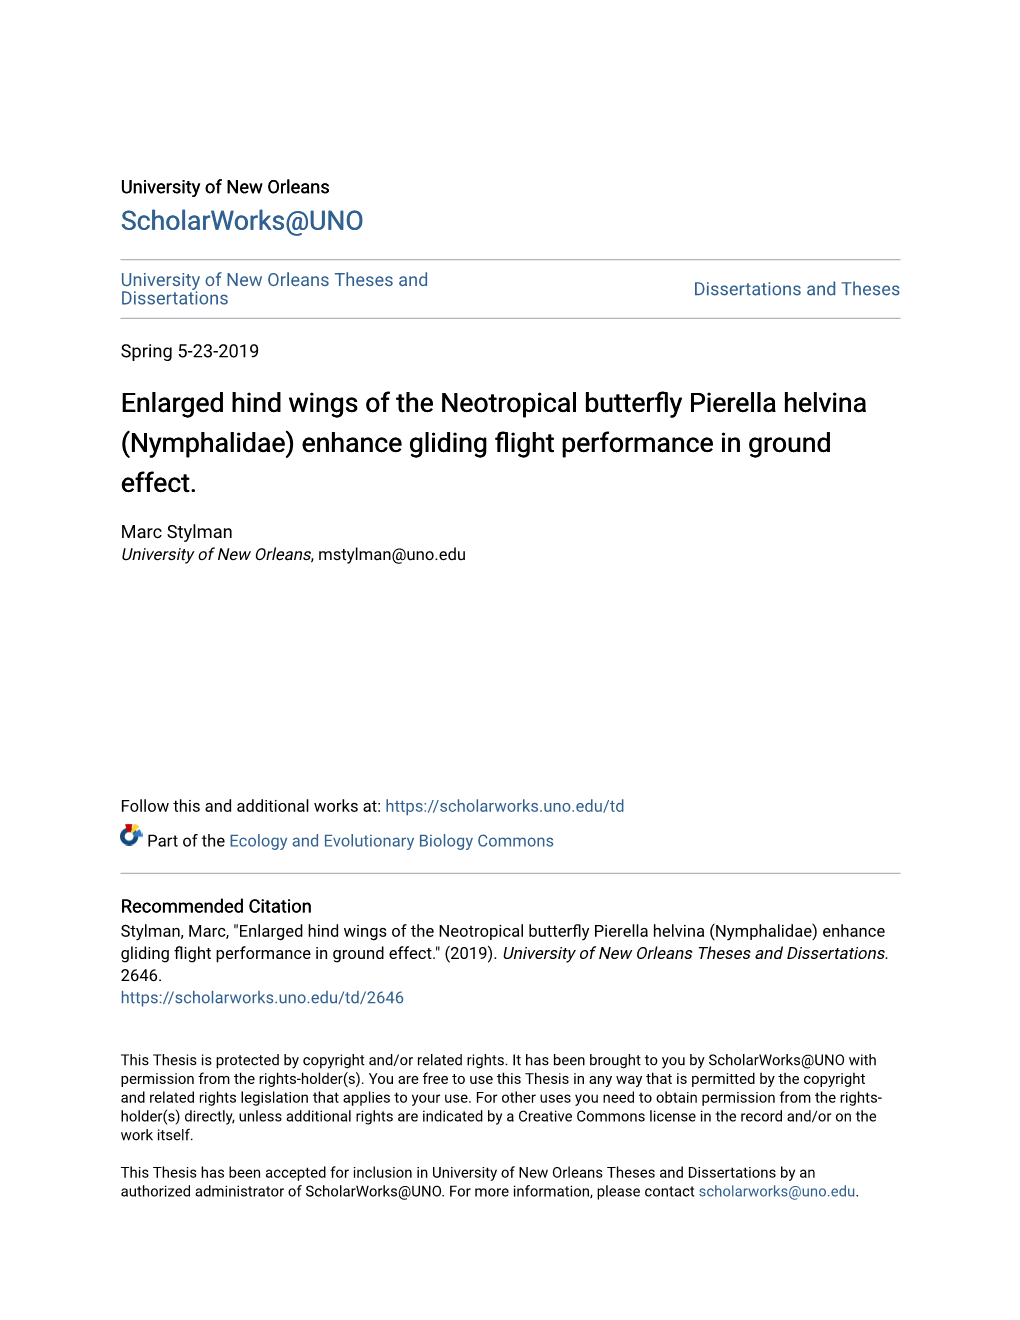 Enlarged Hind Wings of the Neotropical Butterfly Pierella Helvina (Nymphalidae) Enhance Gliding Flight Performance in Ground Effect